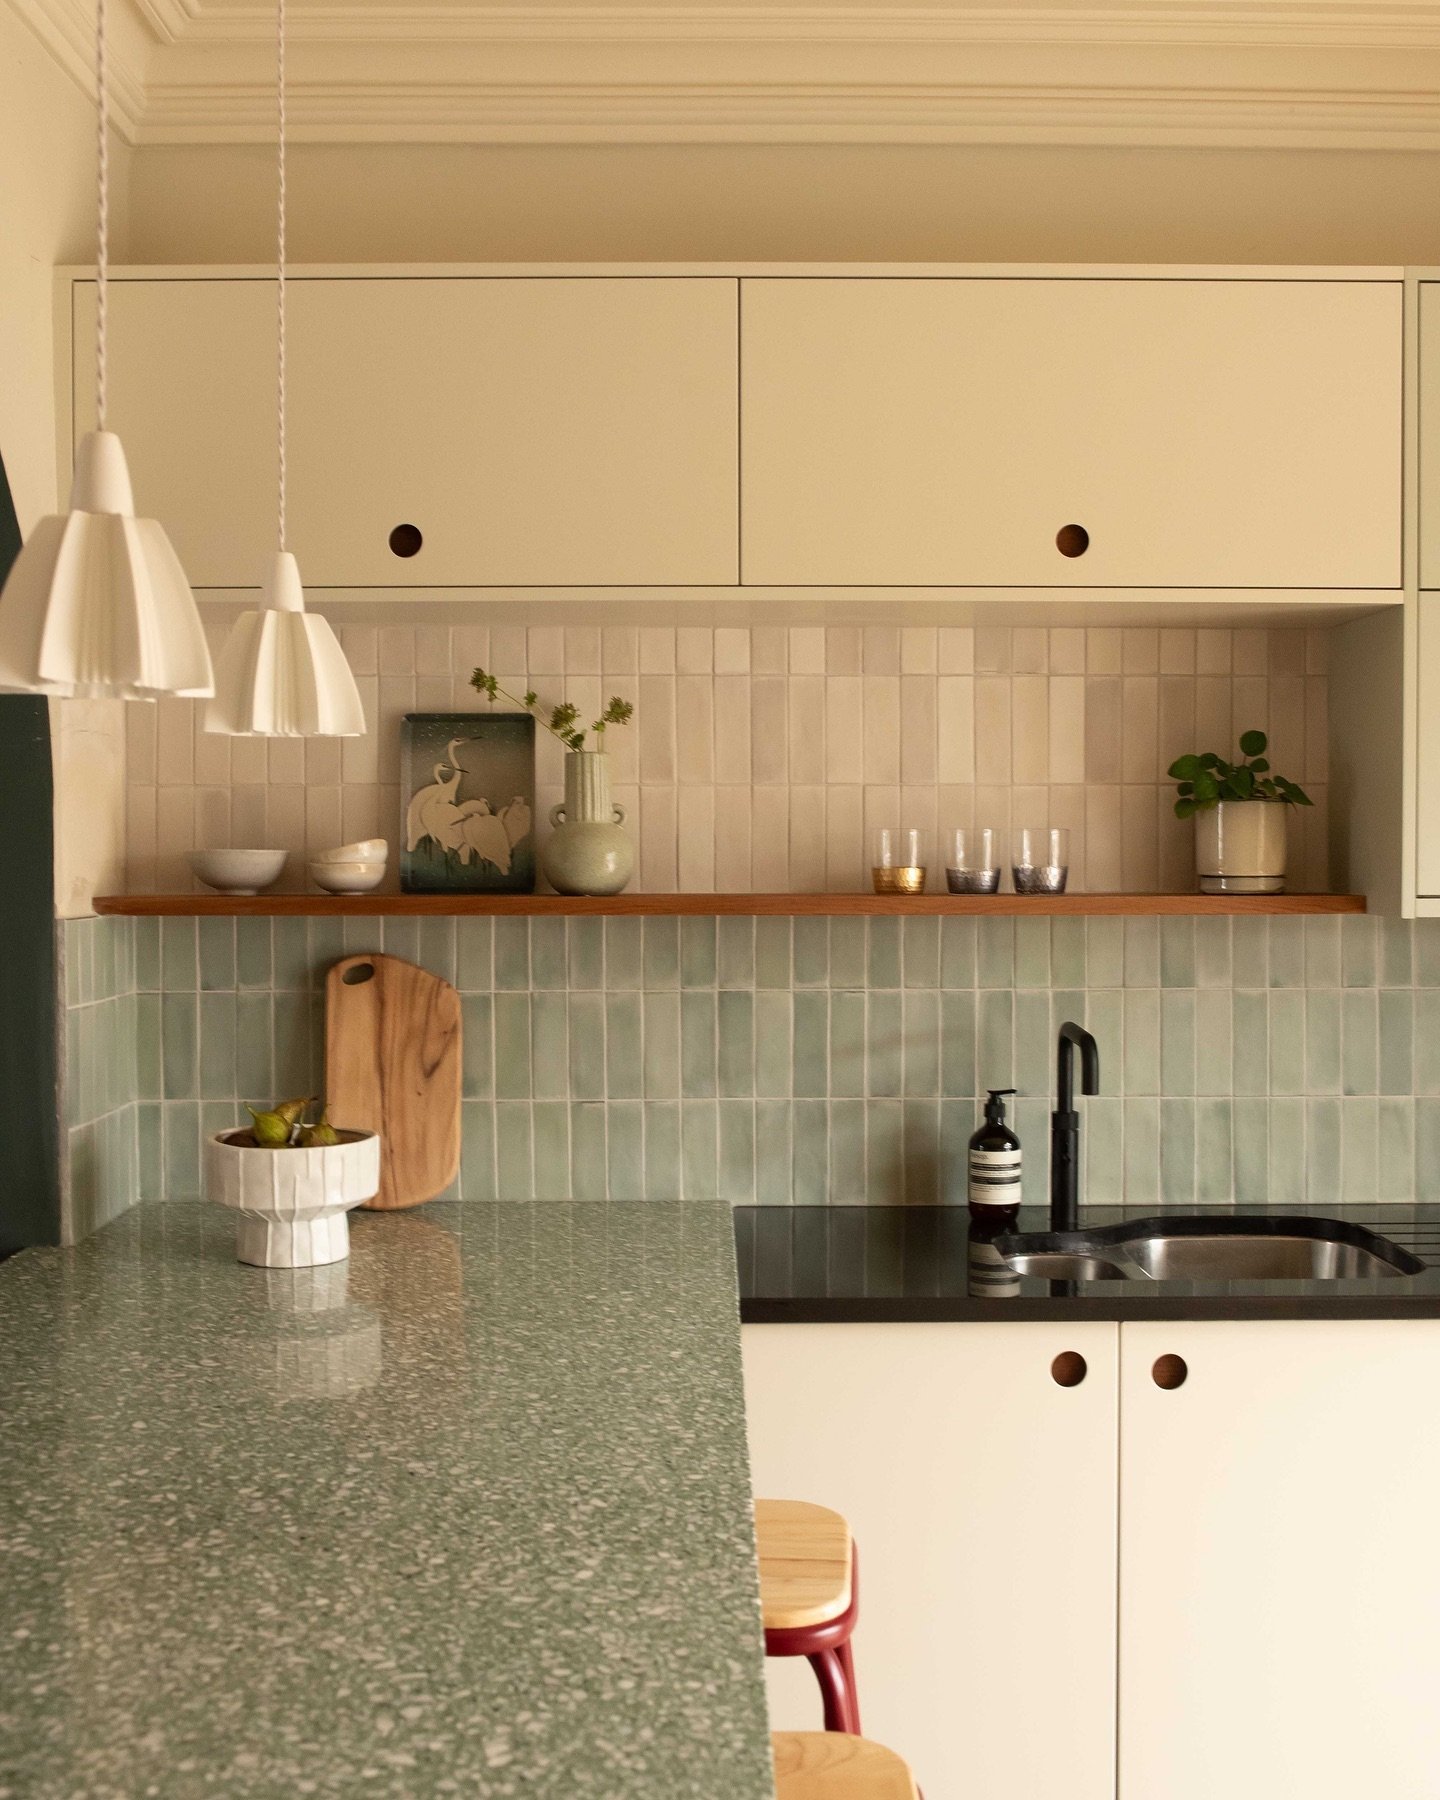 Feel like this lovely kitchen hasn&rsquo;t had enough airtime!! 

I keep seeing articles about the the vertically stacked tile trend, it helps to draw the eye up laying them this way,  we used two toned here for extra interest and to replicate the di